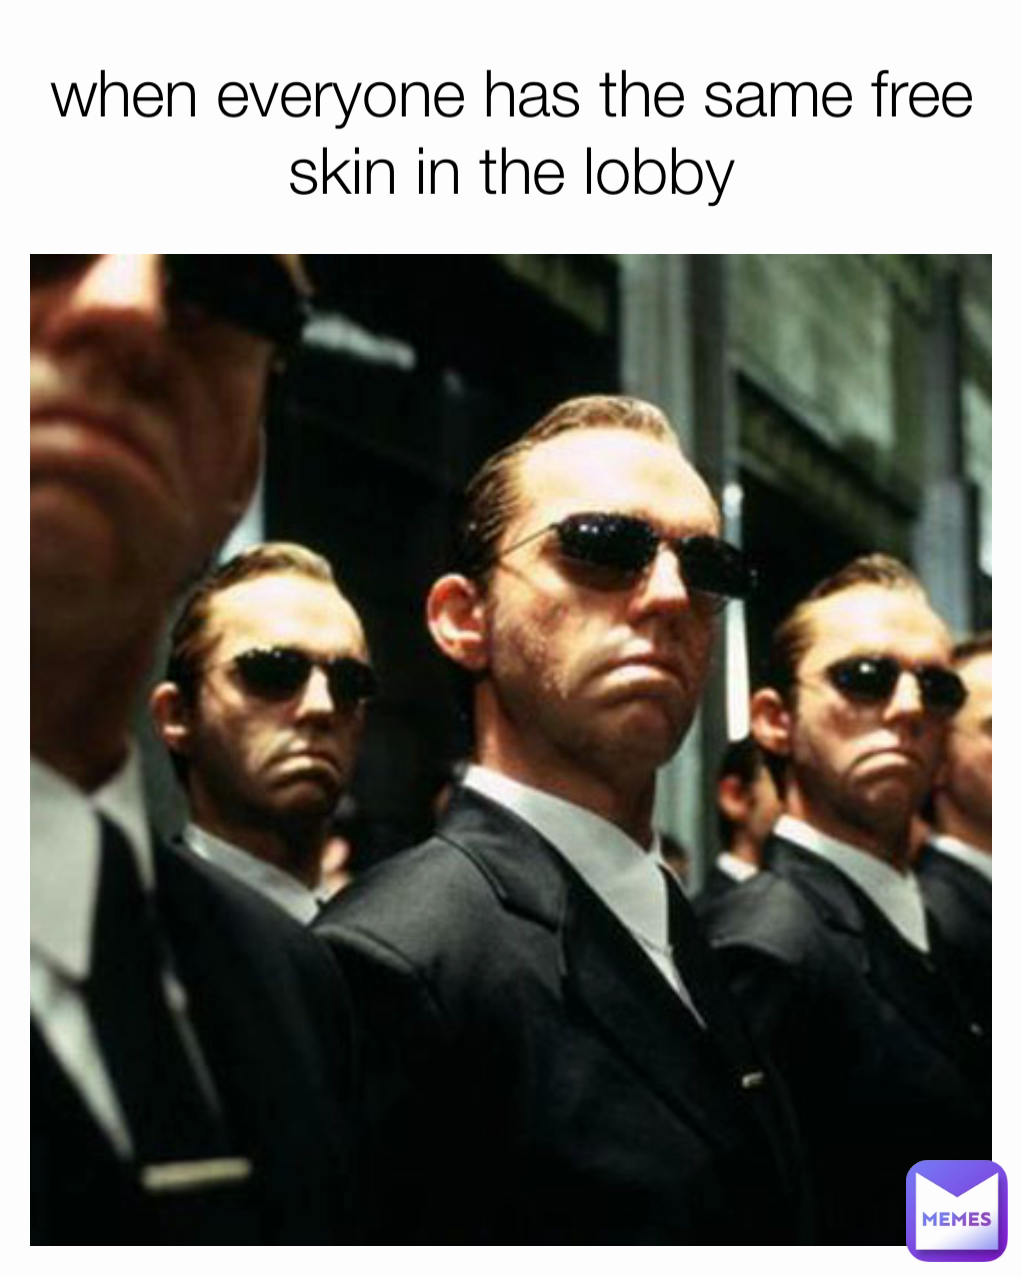 when everyone has the same free skin in the lobby